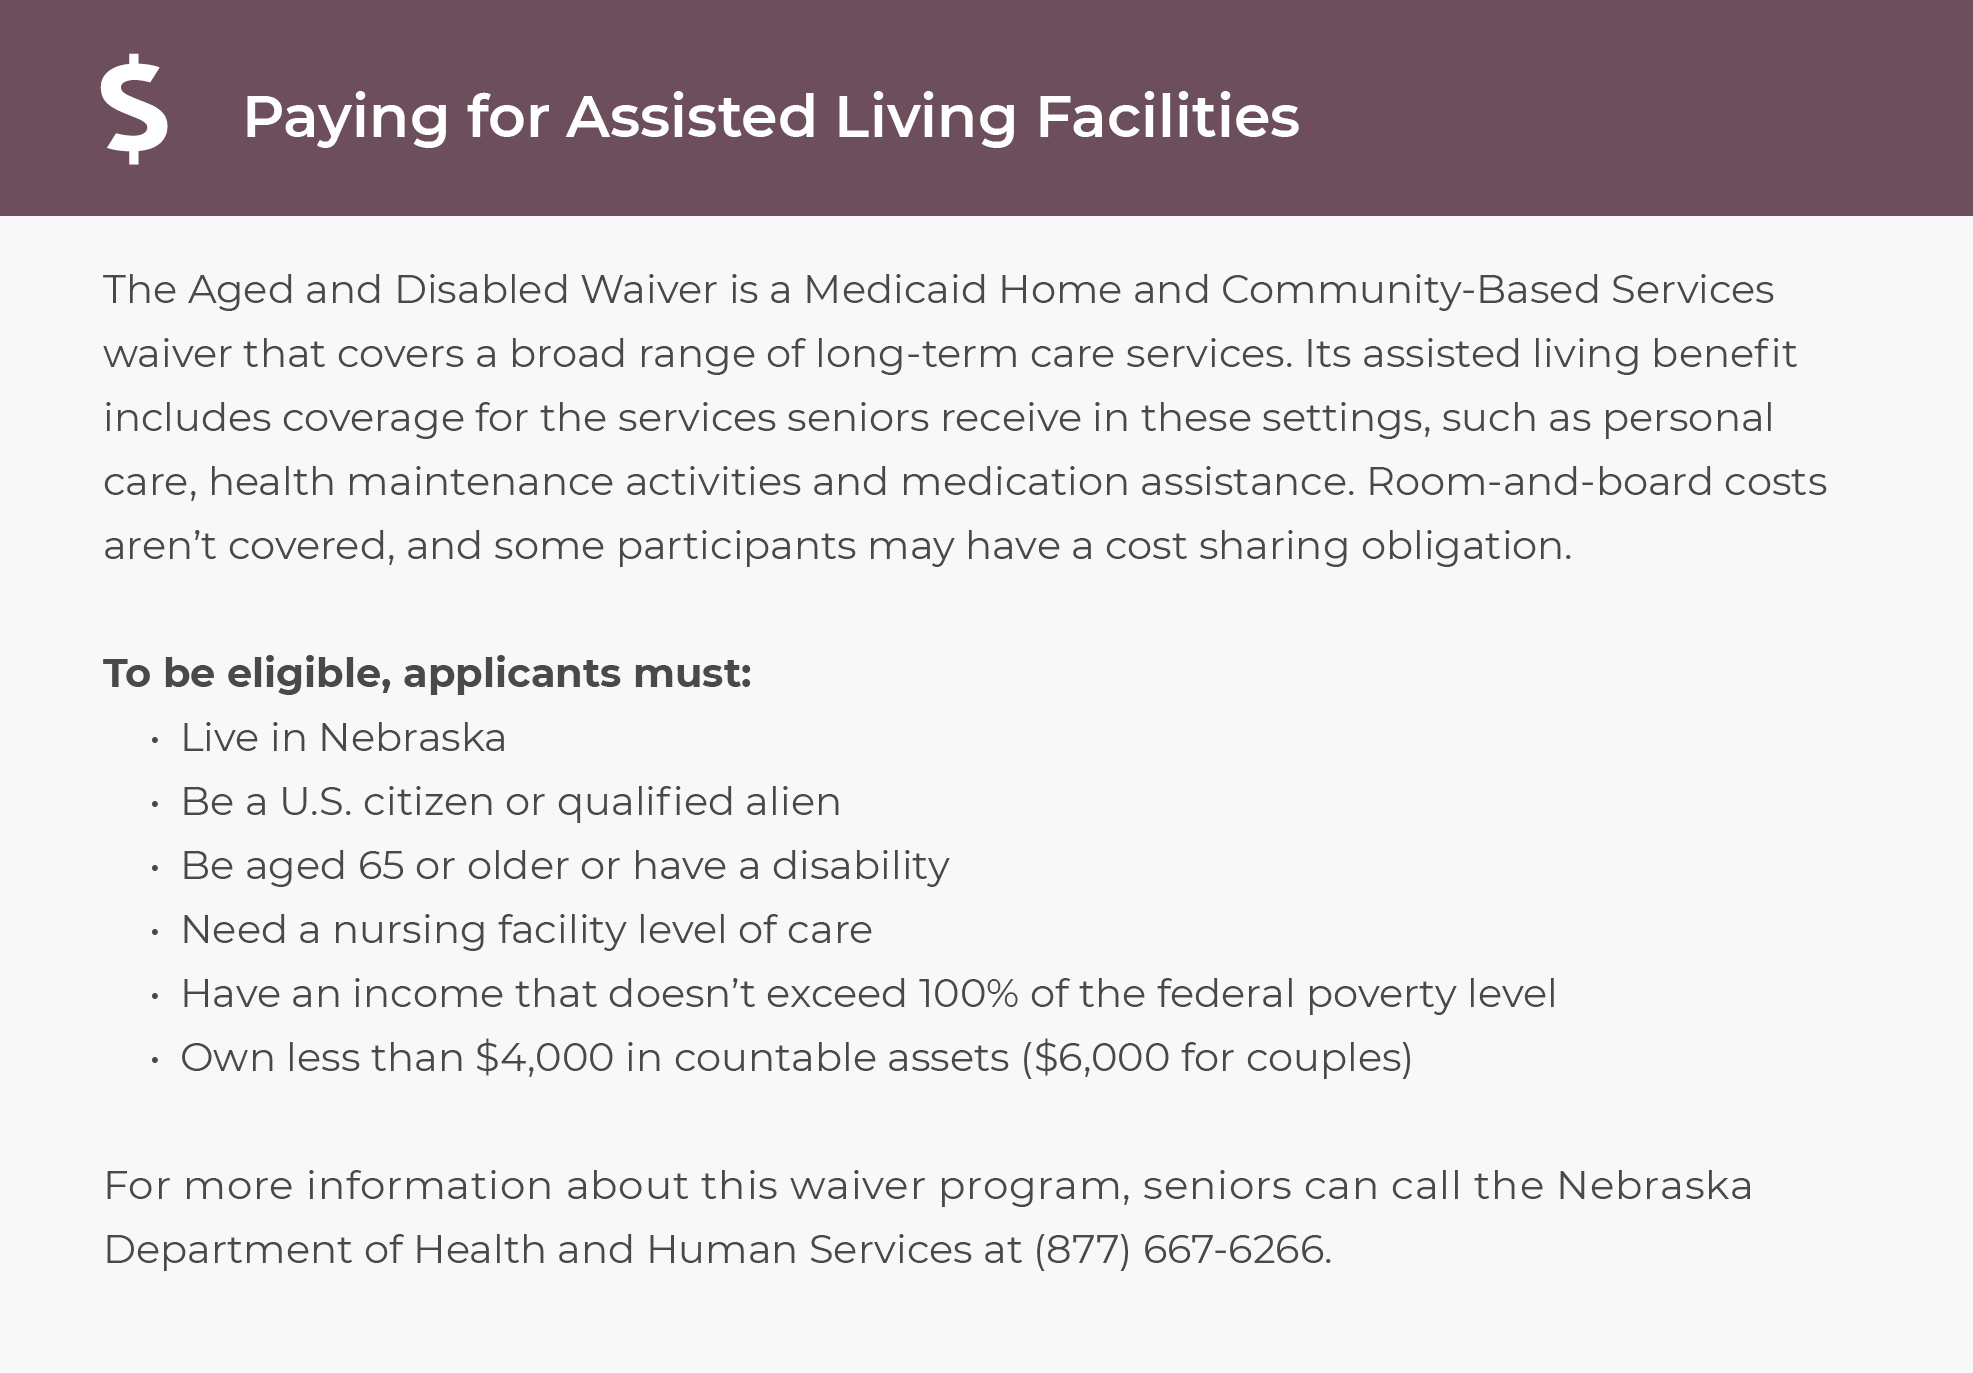 Paying for assisted living in Nebraska